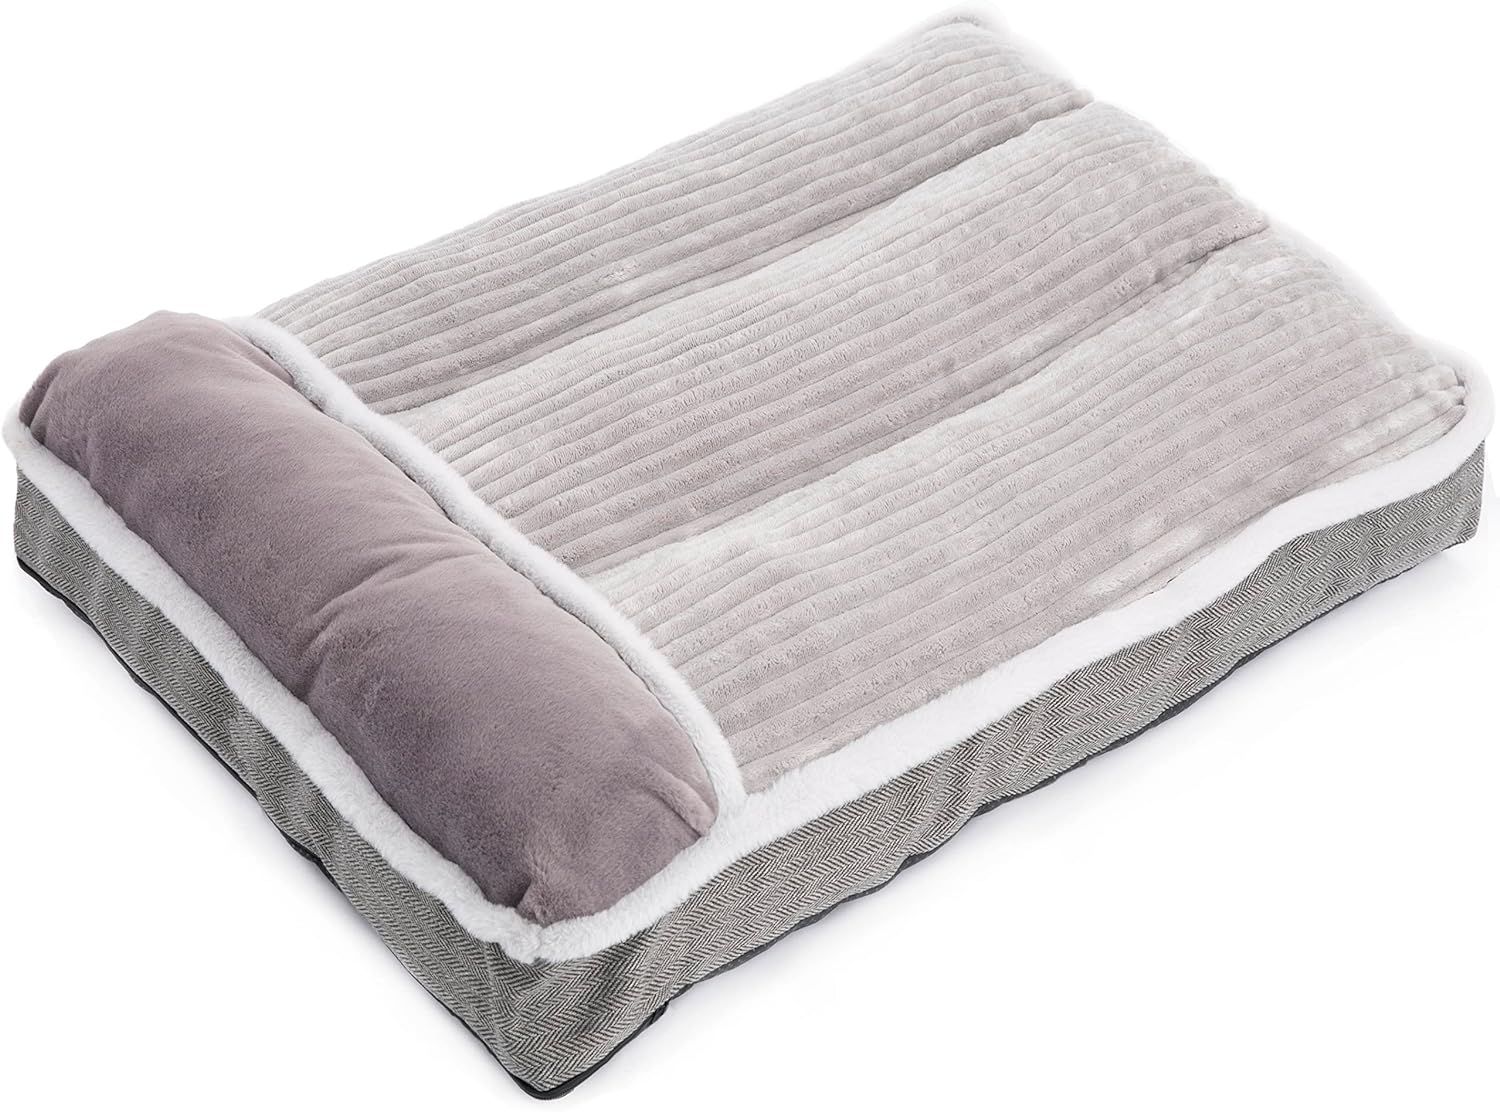 Dog Mattress Bed with Pillow for Crate Kennel Super Soft Sofa Bed for Pets,